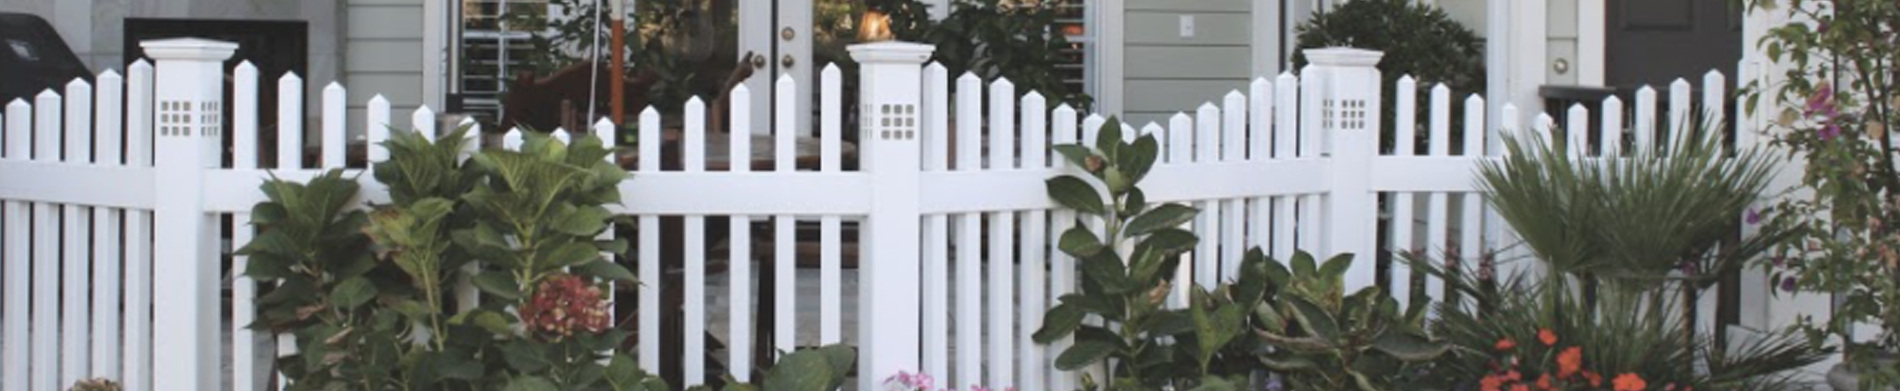 Duramax vinyl fencing manufacturers get you premium quality fence for your yard